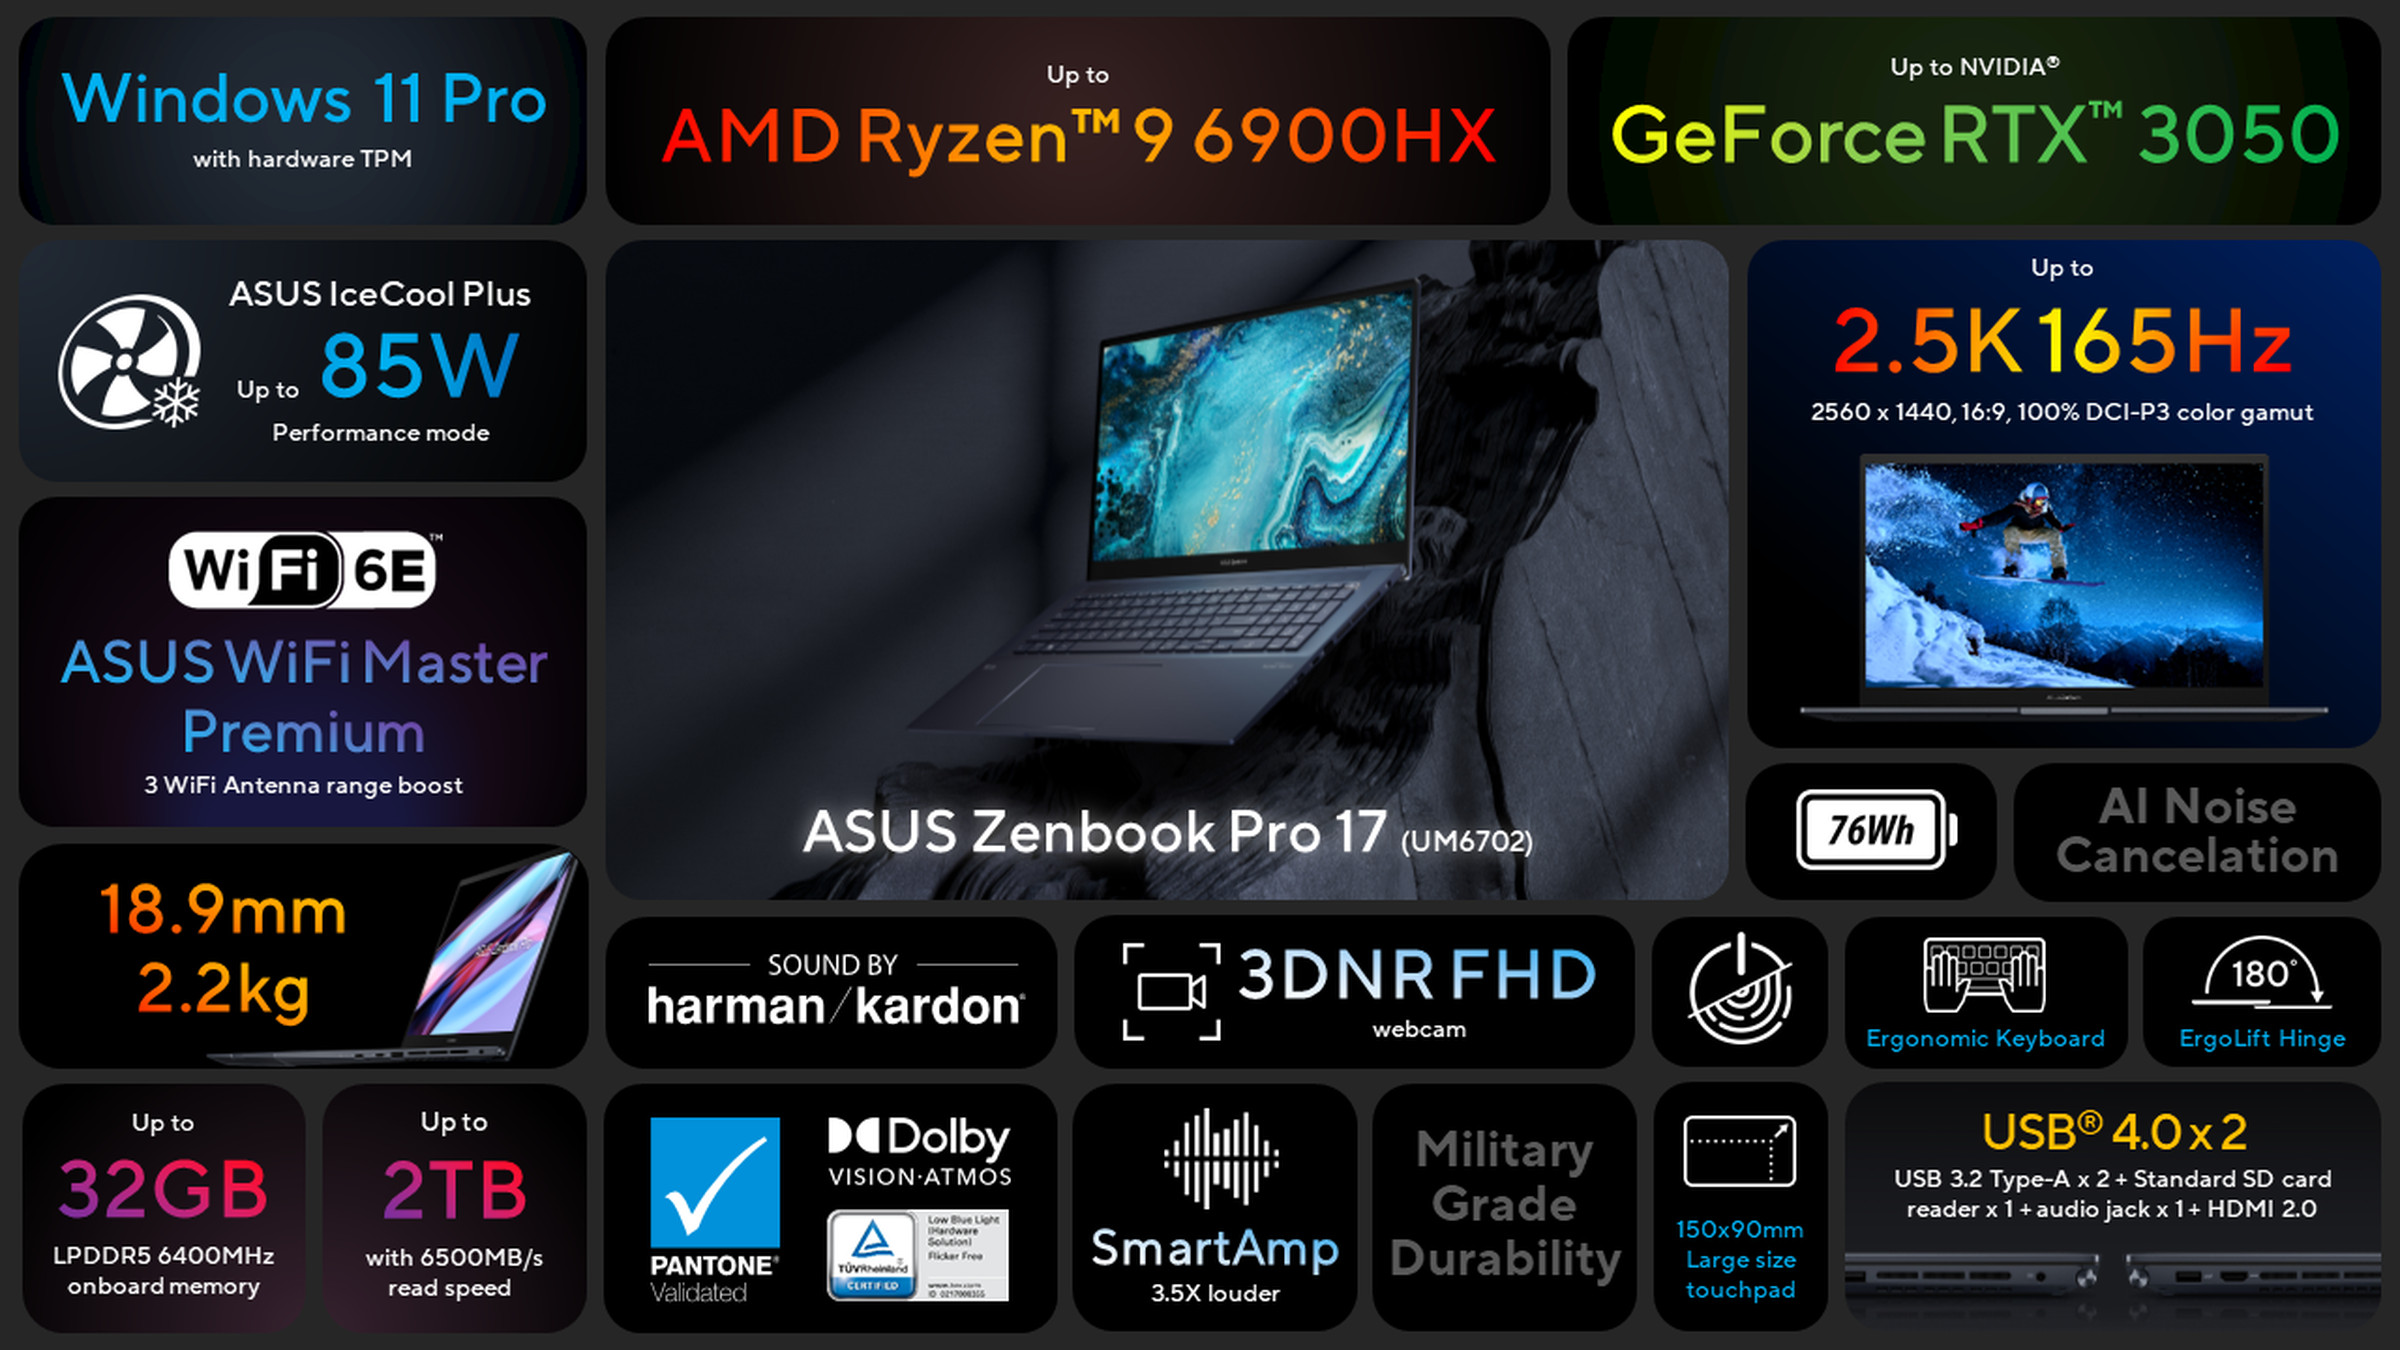 The Asus Zenbook Pro 17 has a 2.5K 165Hz screen with up to Ryzen 9 6900HX, RTX 3050, with 76Wh battery, at 18.9mm thick. No Thunderbolt here.